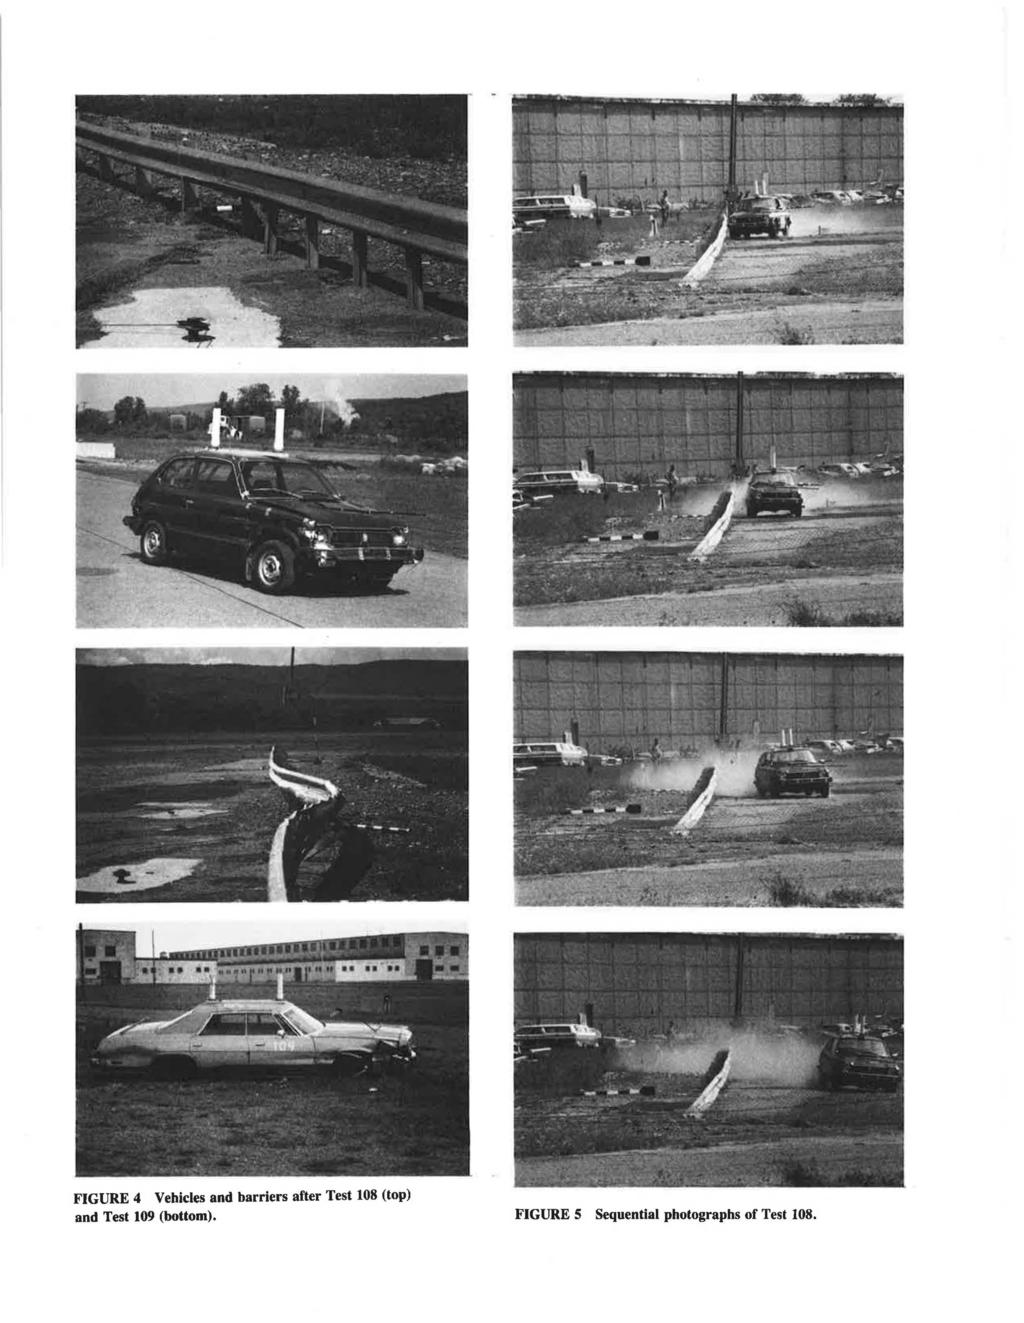 FIGURE 4 Vehicles and barriers after Test 108 (top) and